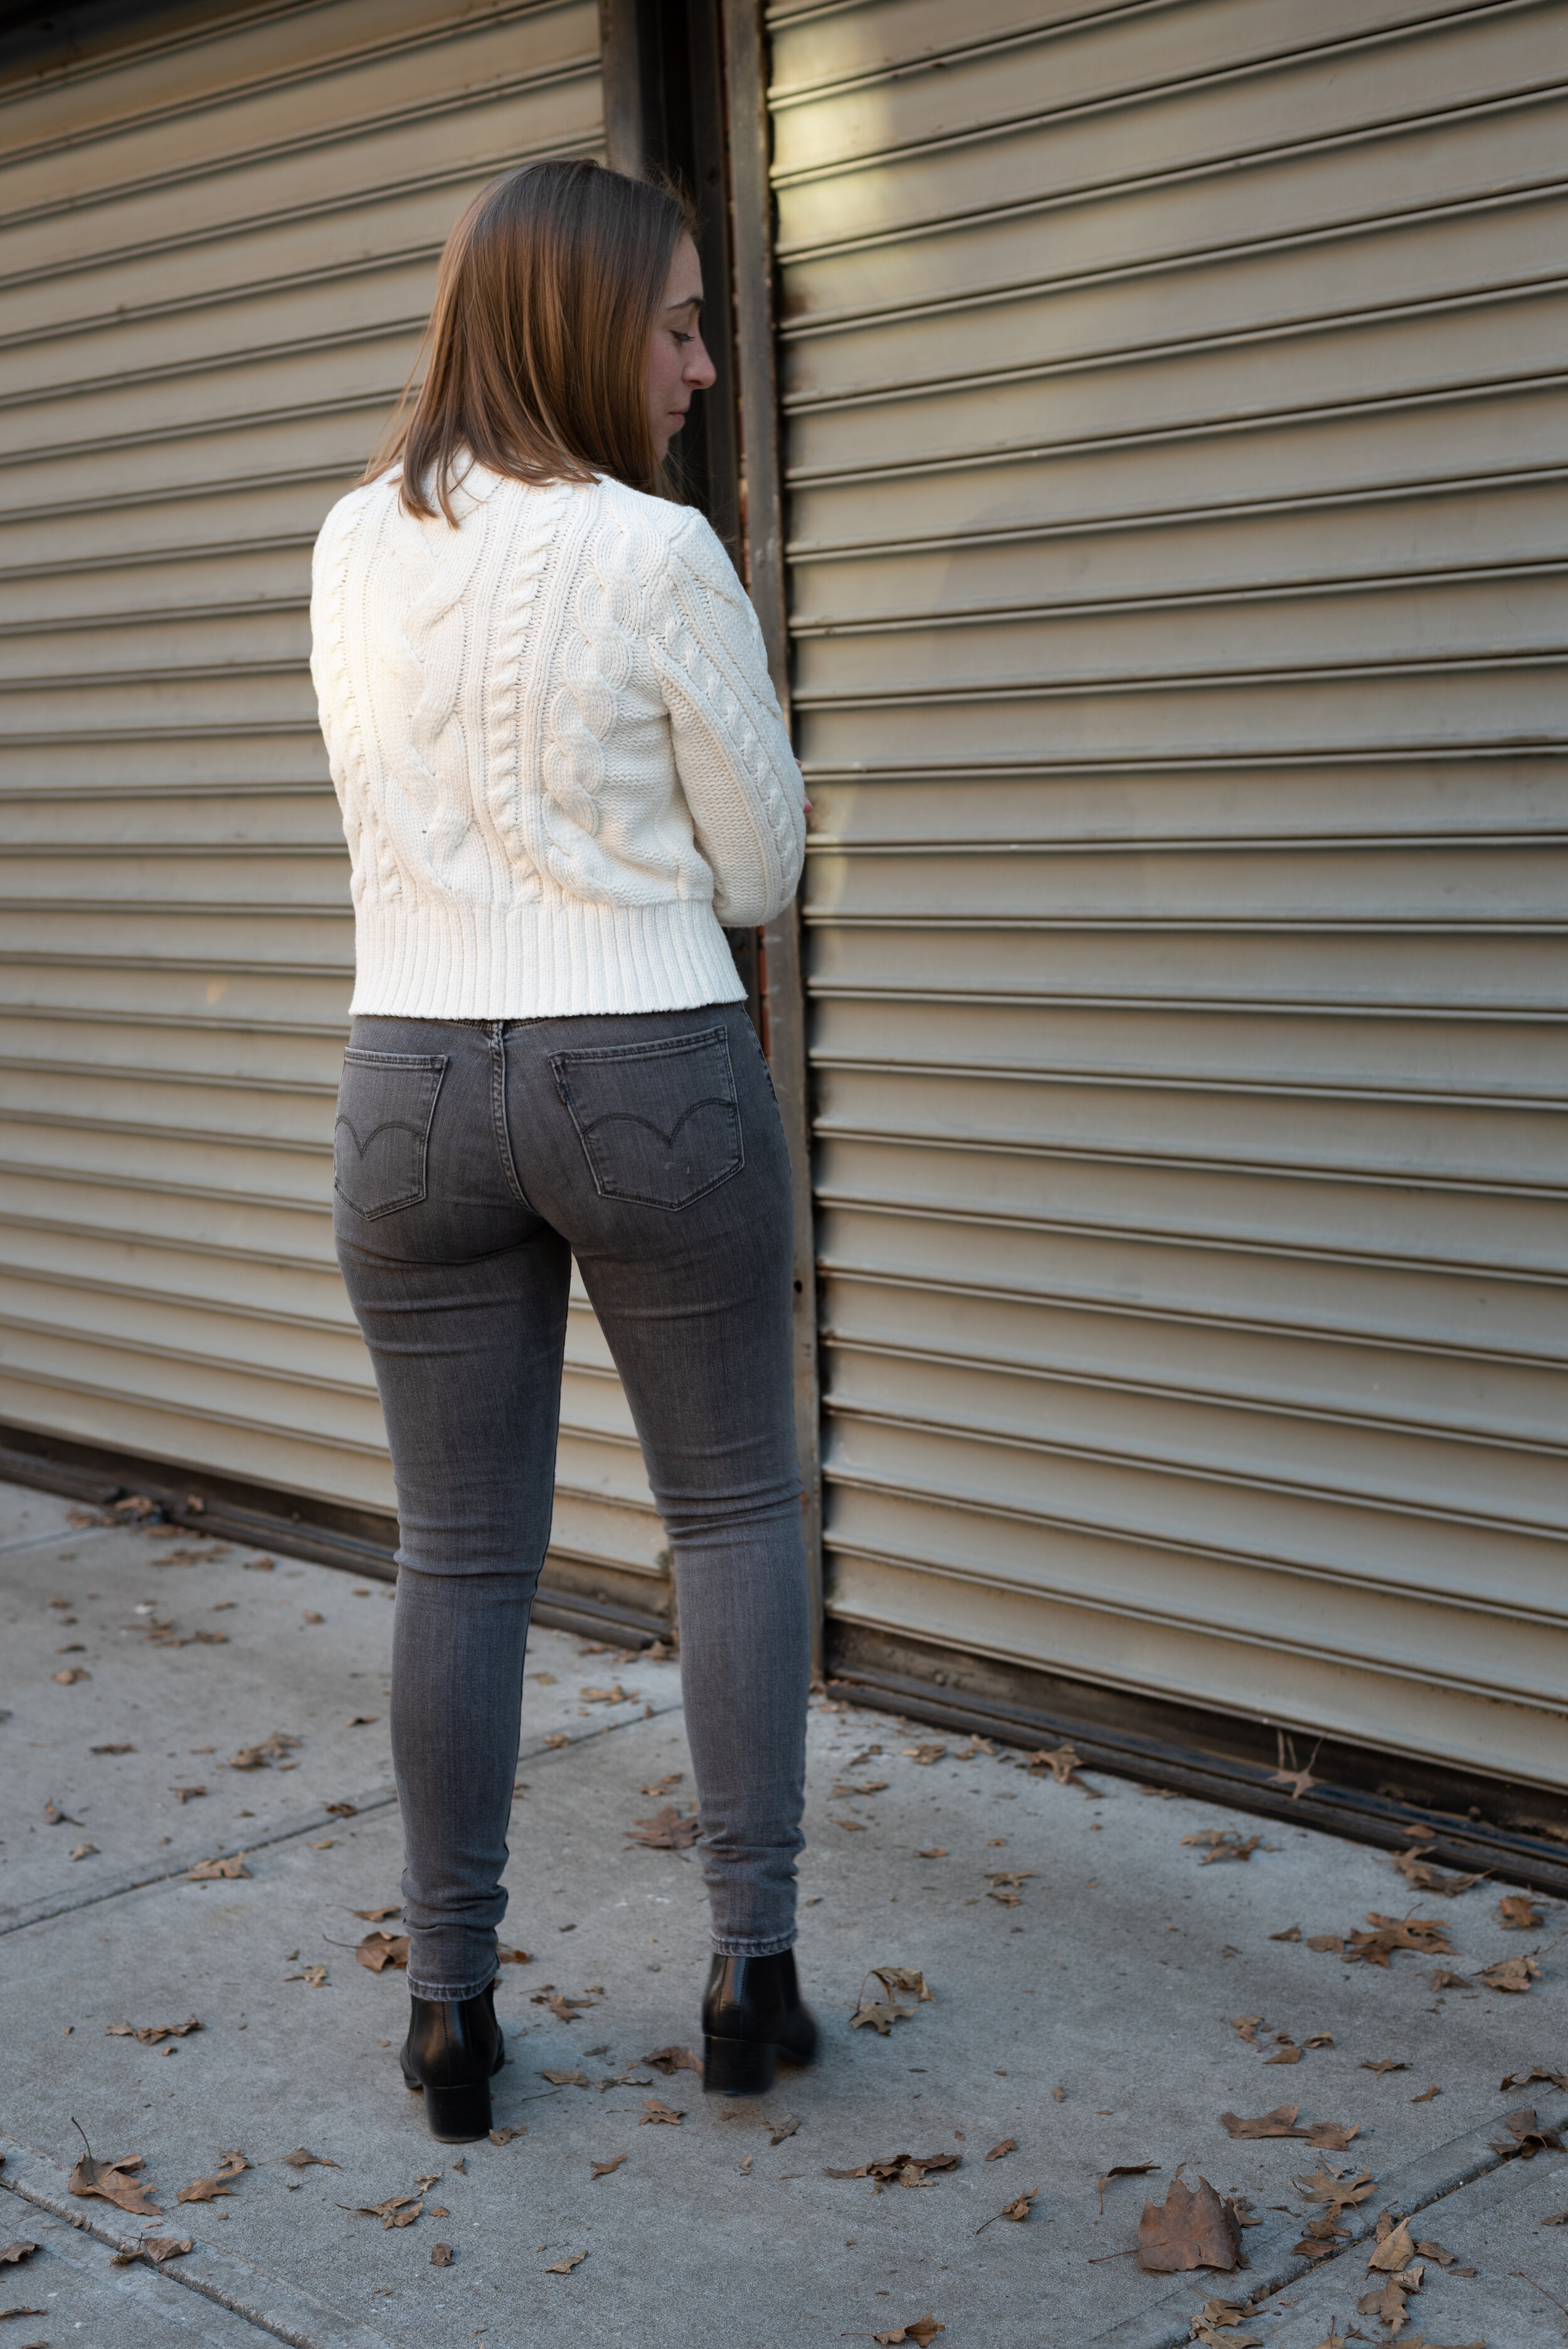 levi's 721 high rise skinny jeans review